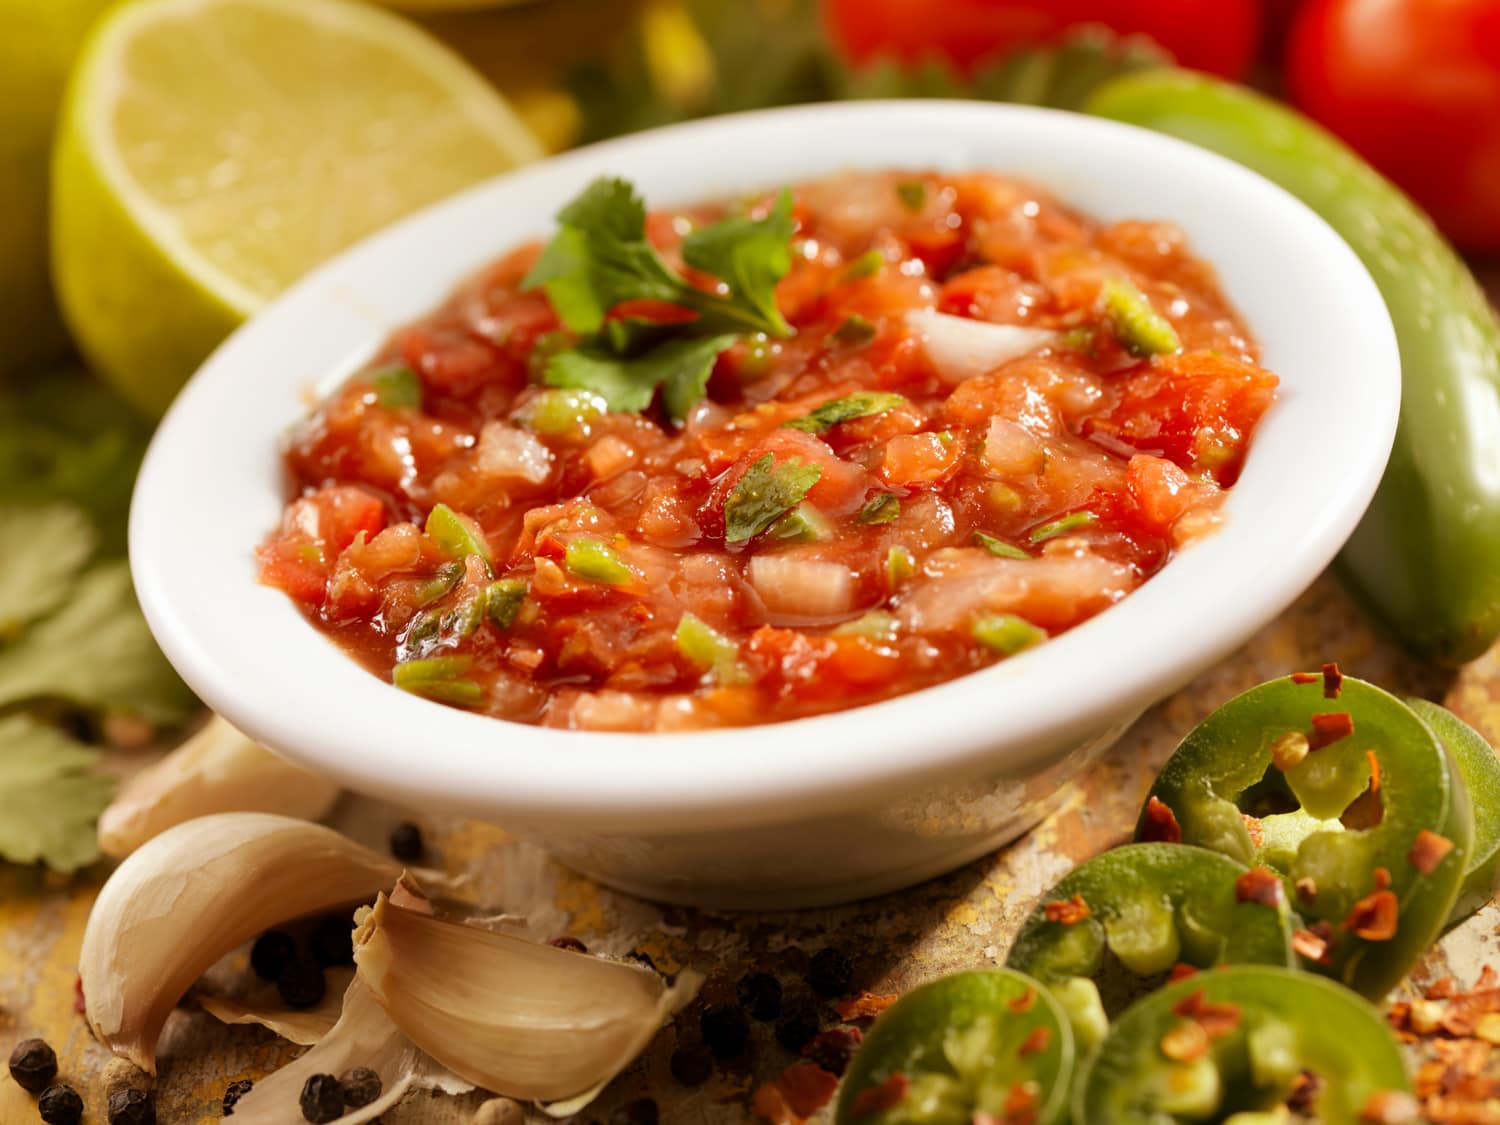 Salsa with all It's Ingredients